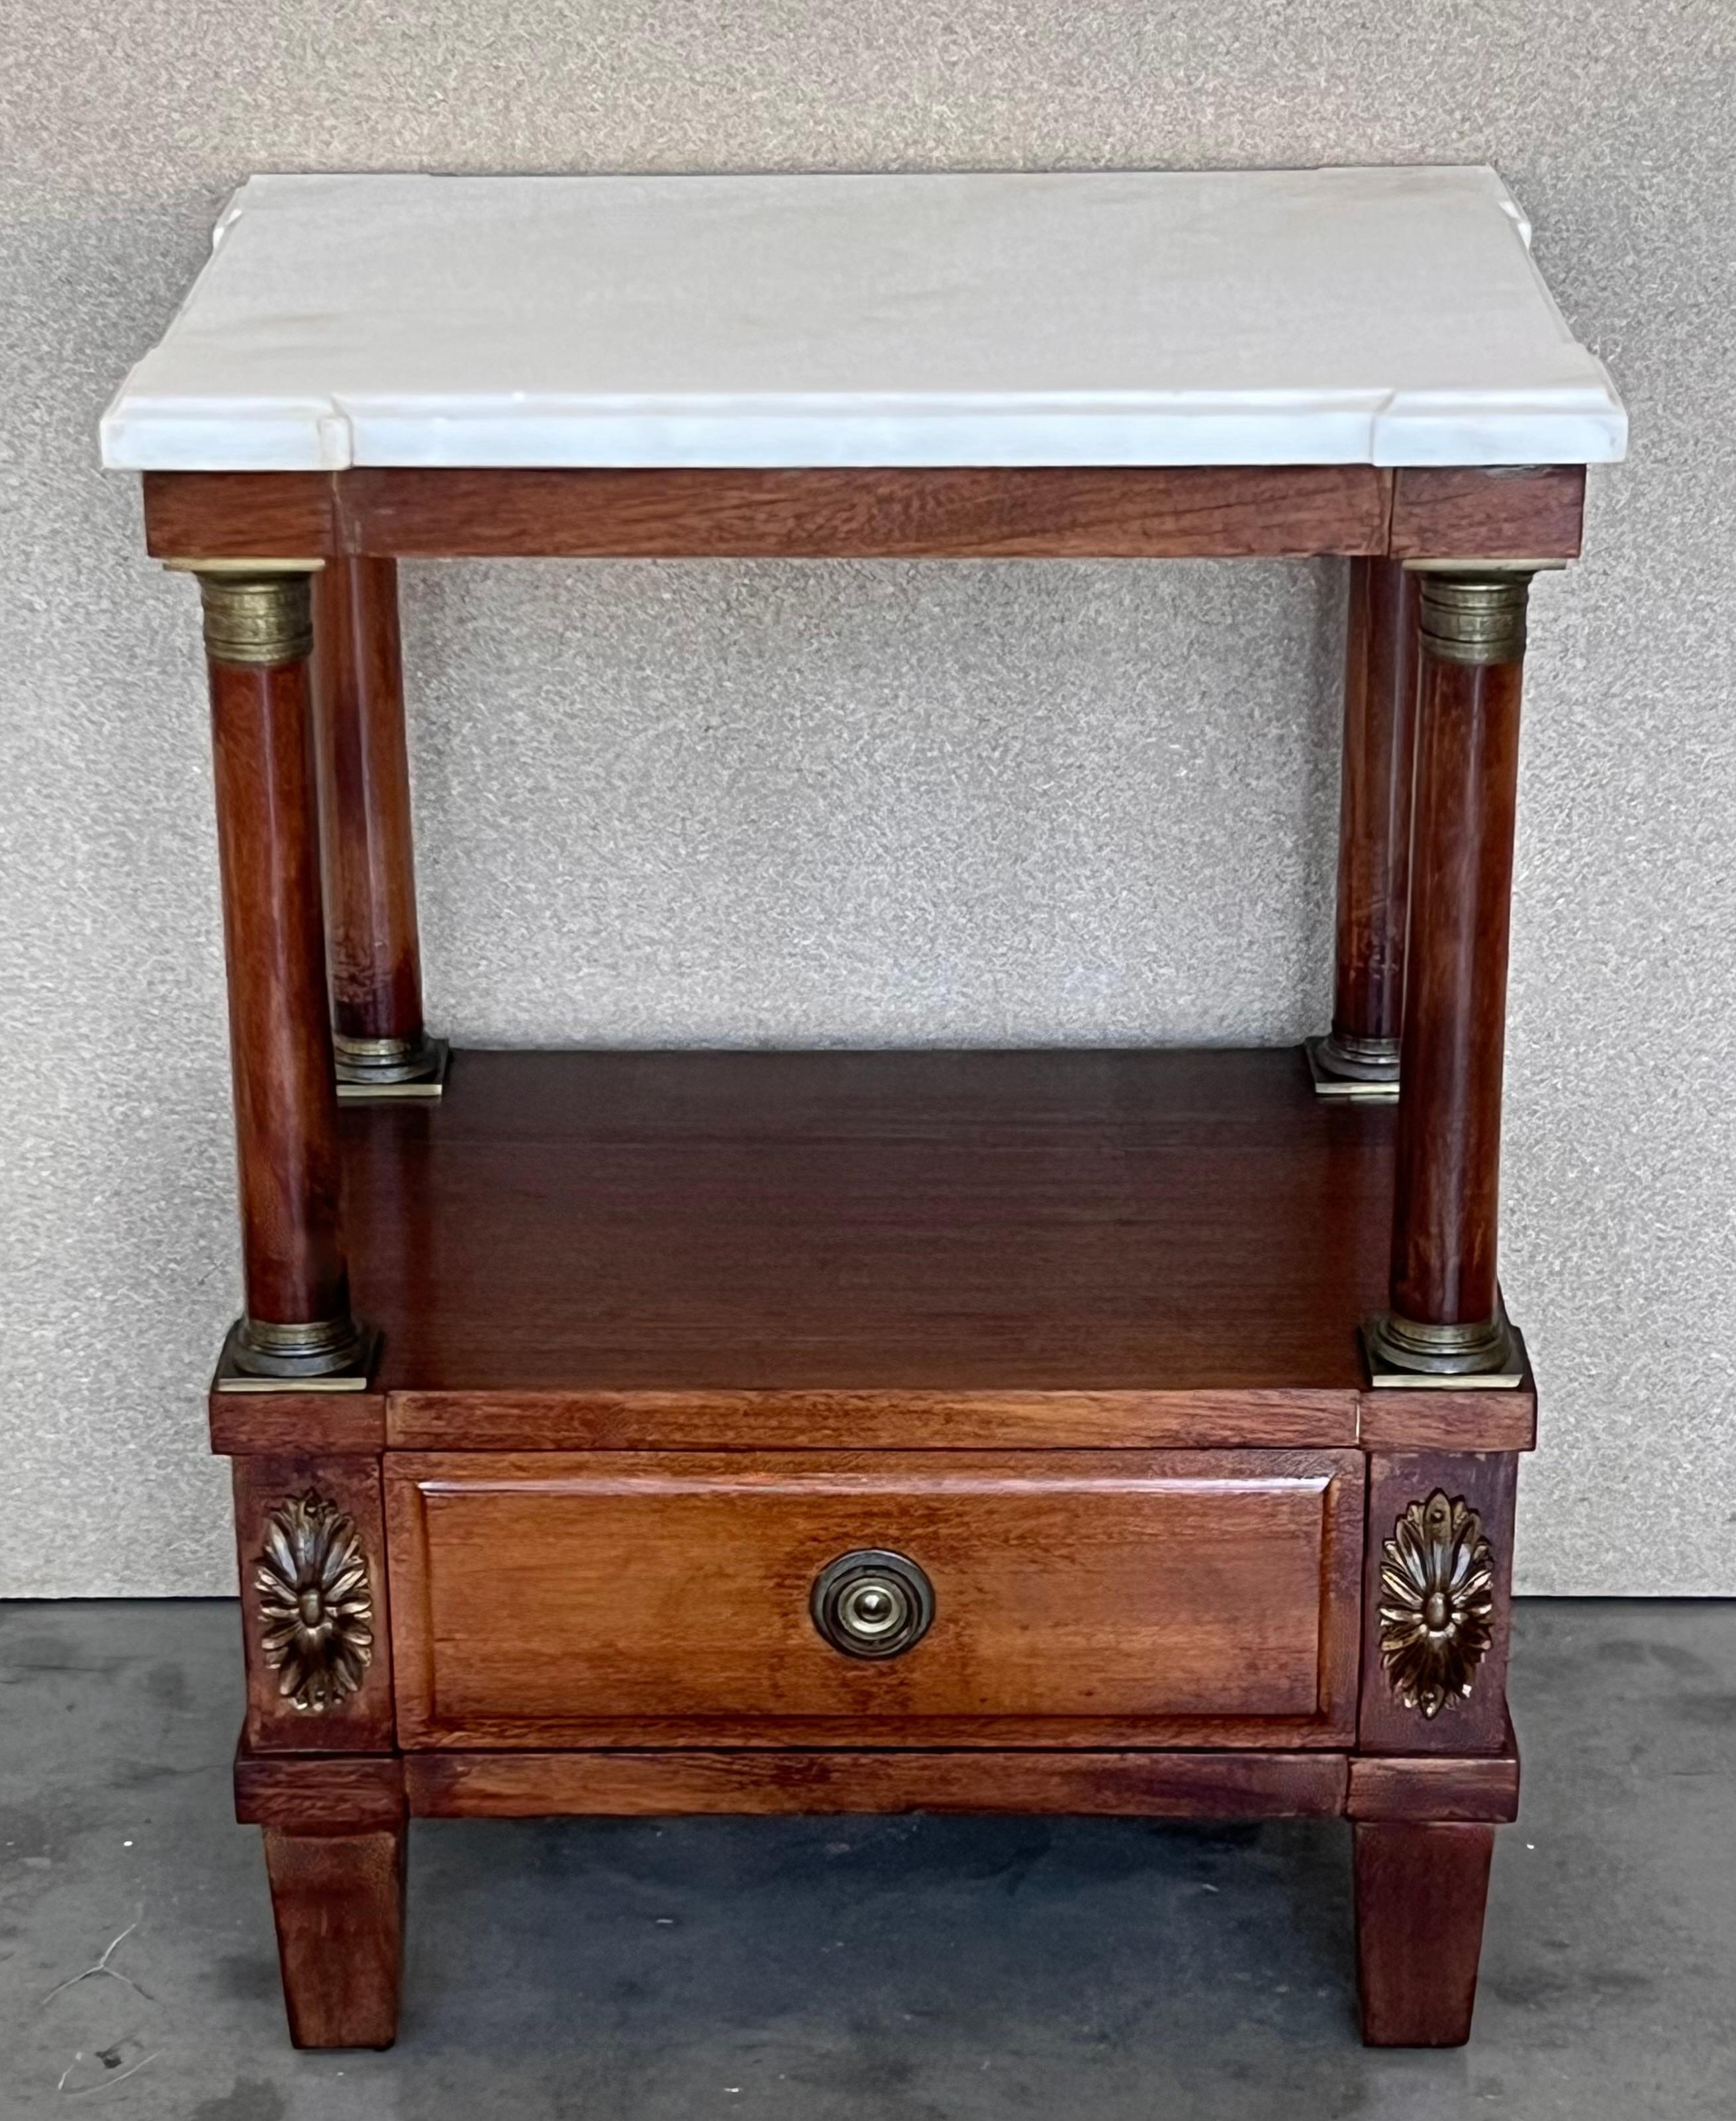 French Empire Solid walnut wood. Gilded and chiselled fittings. Two-wise frame base with protruding rectangular marble slab on square columns, joined by an intermediate compartment ending in rollers. Plate with beveled corners.